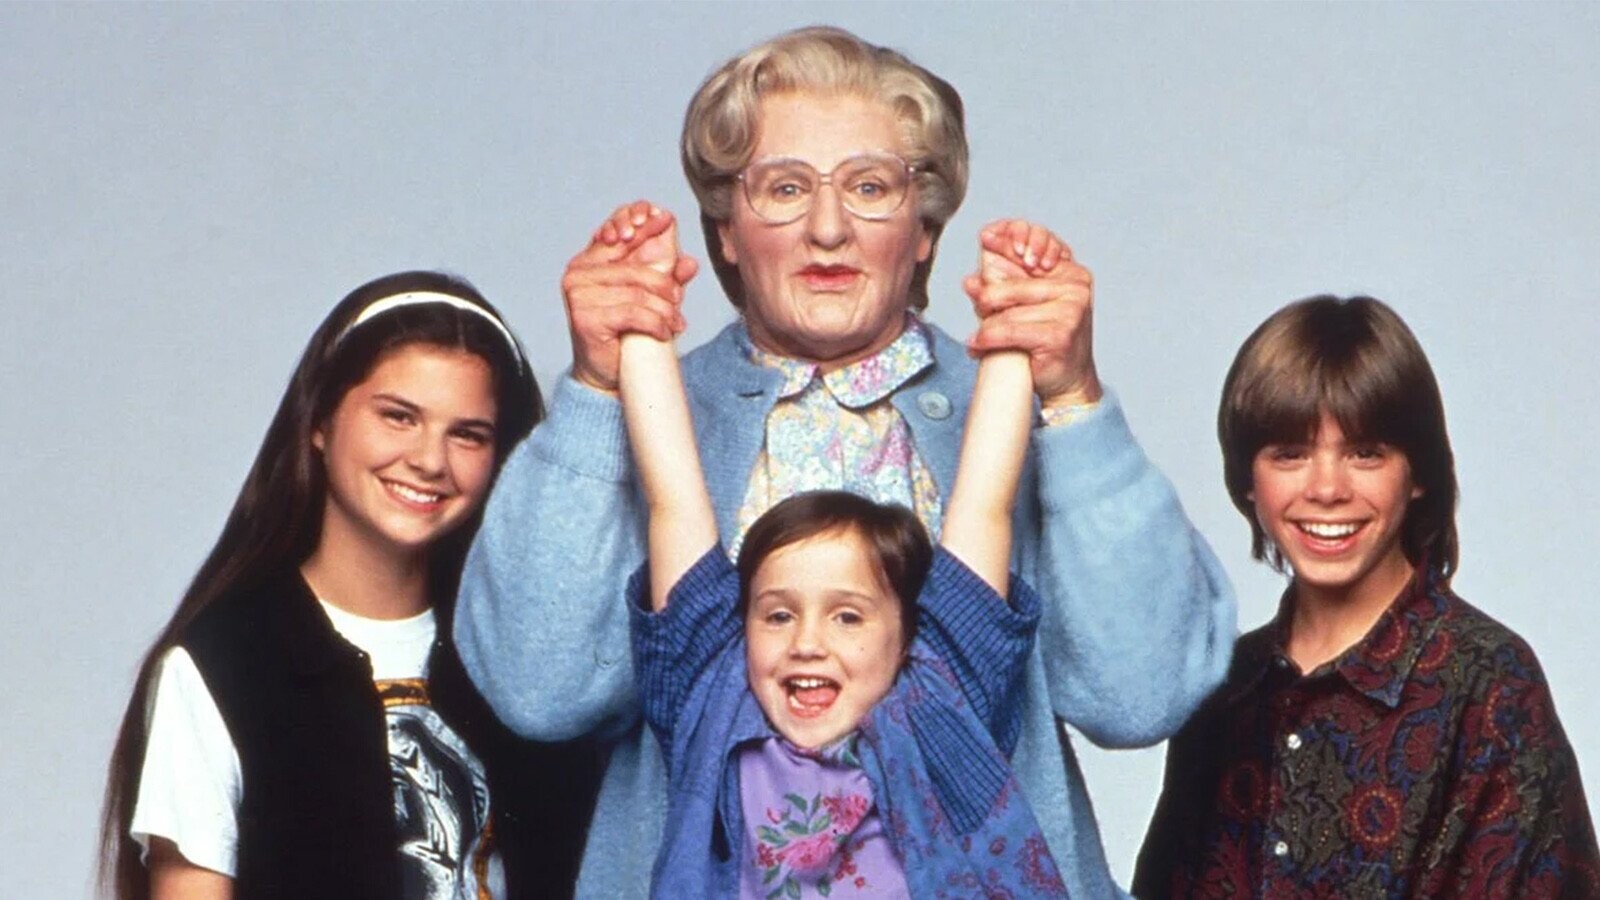 Robin Williams Defended ‘Mrs. Doubtfire’ Kid to Her High School Principal